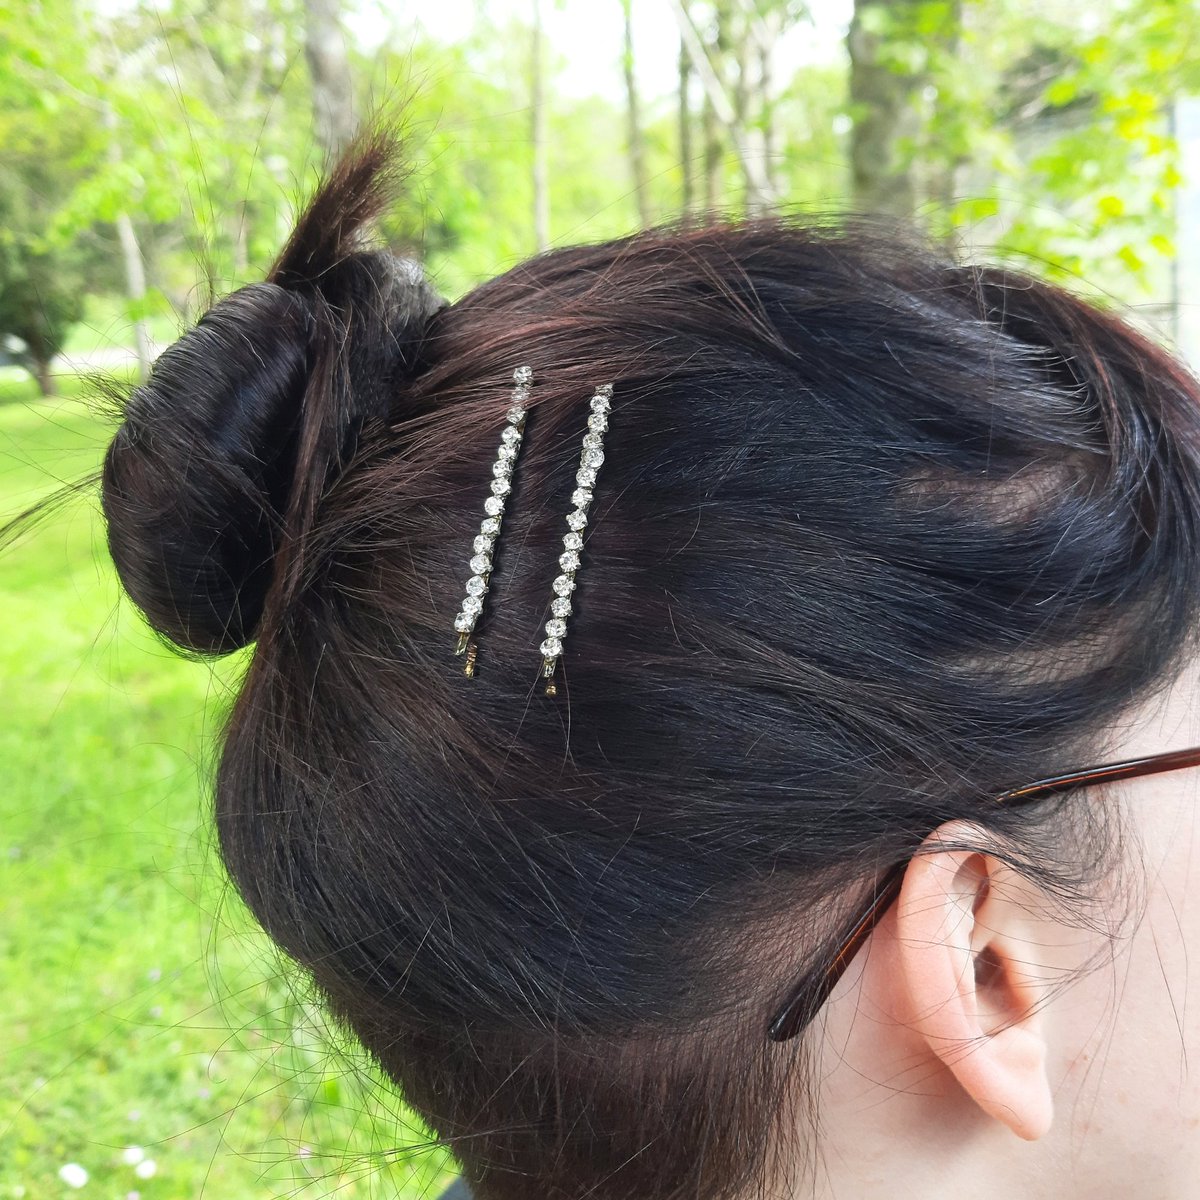 Brand new listing! These are a set of 4 dainty rhinestone bobby pins. The crystals are fully bonded to the grip making them a lovely accessory for wherever you wish to wear them etsy.com/uk/listing/171… #mhhsbd #rhinestones